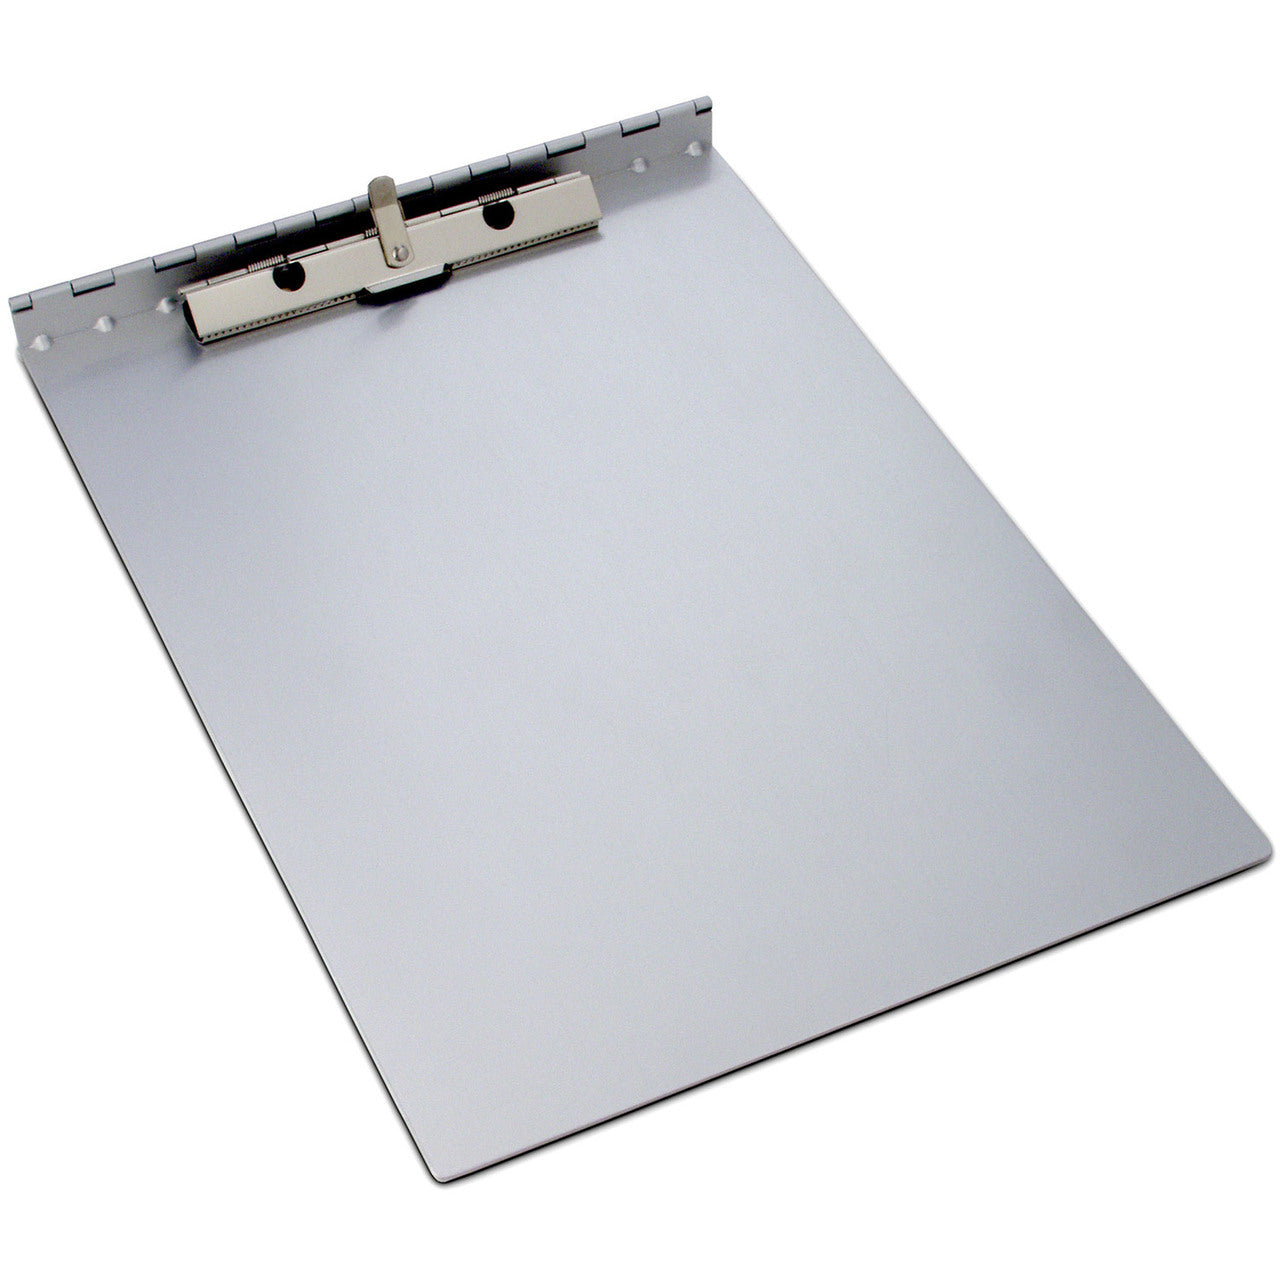 Saunders Clipboard with Privacy Cover - DISCONTINUED